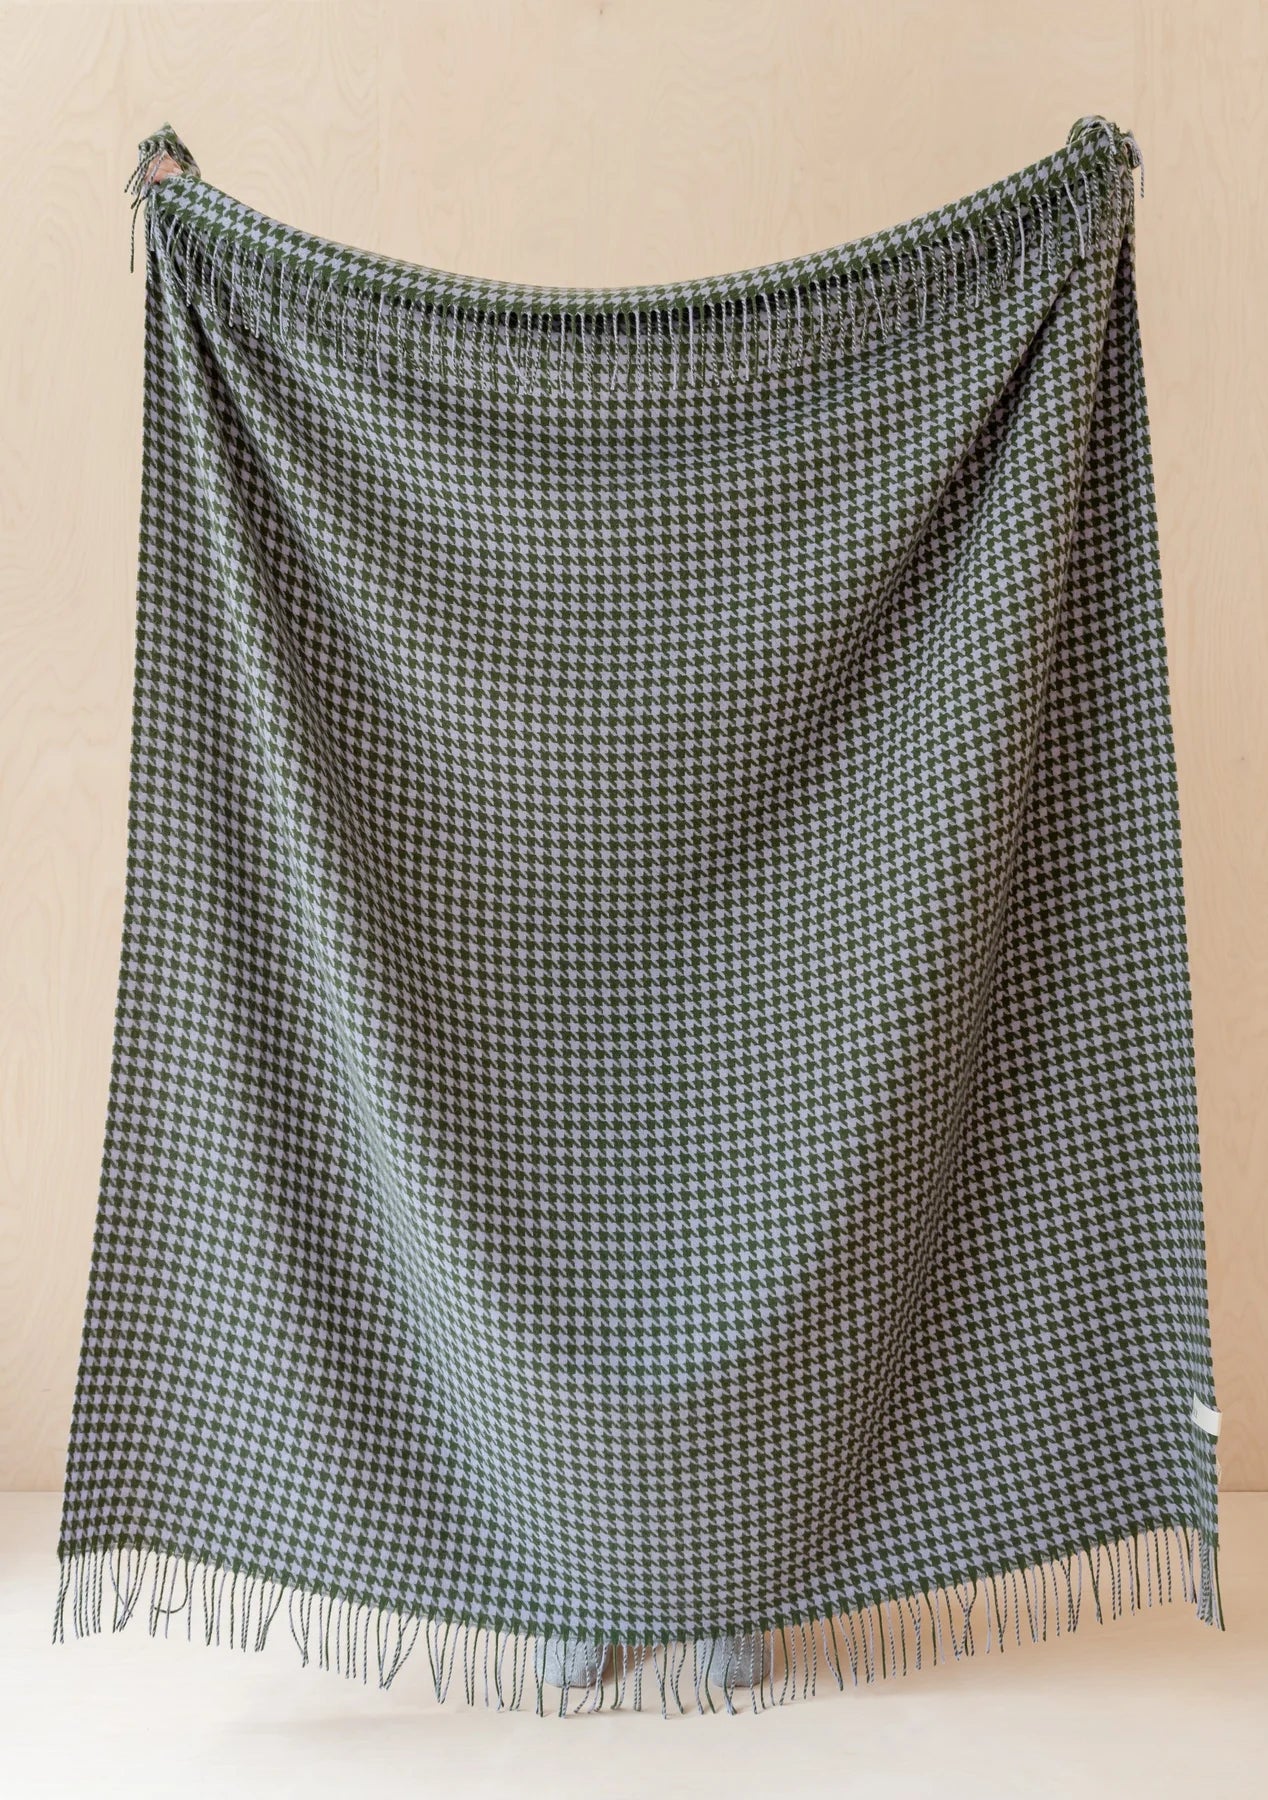 Lambswool Blanket : Olive Houndstooth